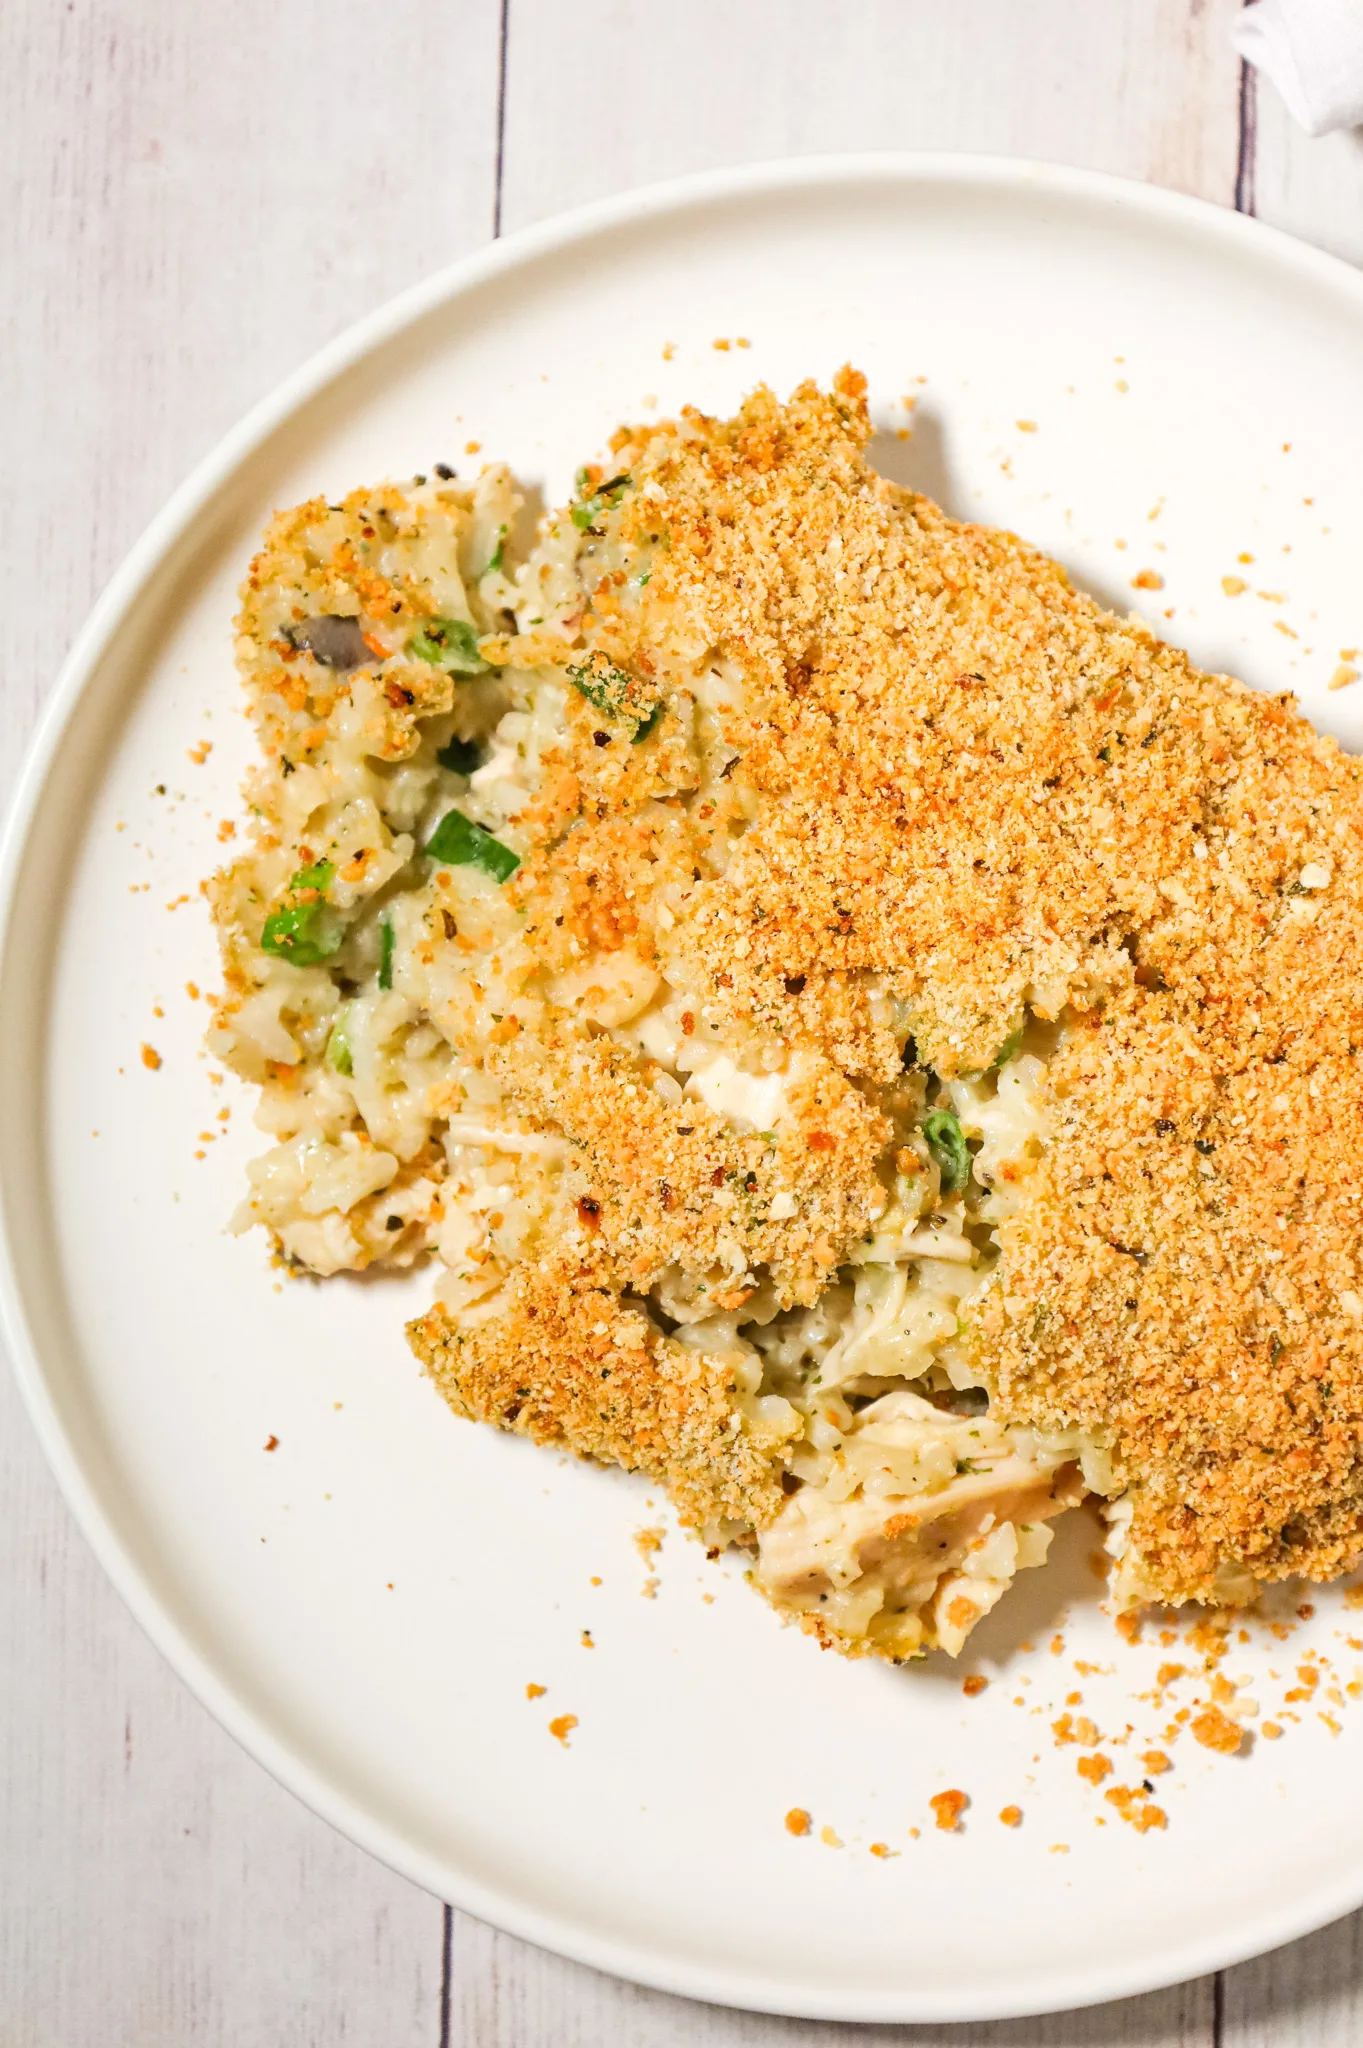 Old School Chicken and Rice Casserole is an easy dinner recipe using shredded rotisserie chicken, three flavours of cream soups, instant rice, green onions, parmesan cheese and bread crumbs.